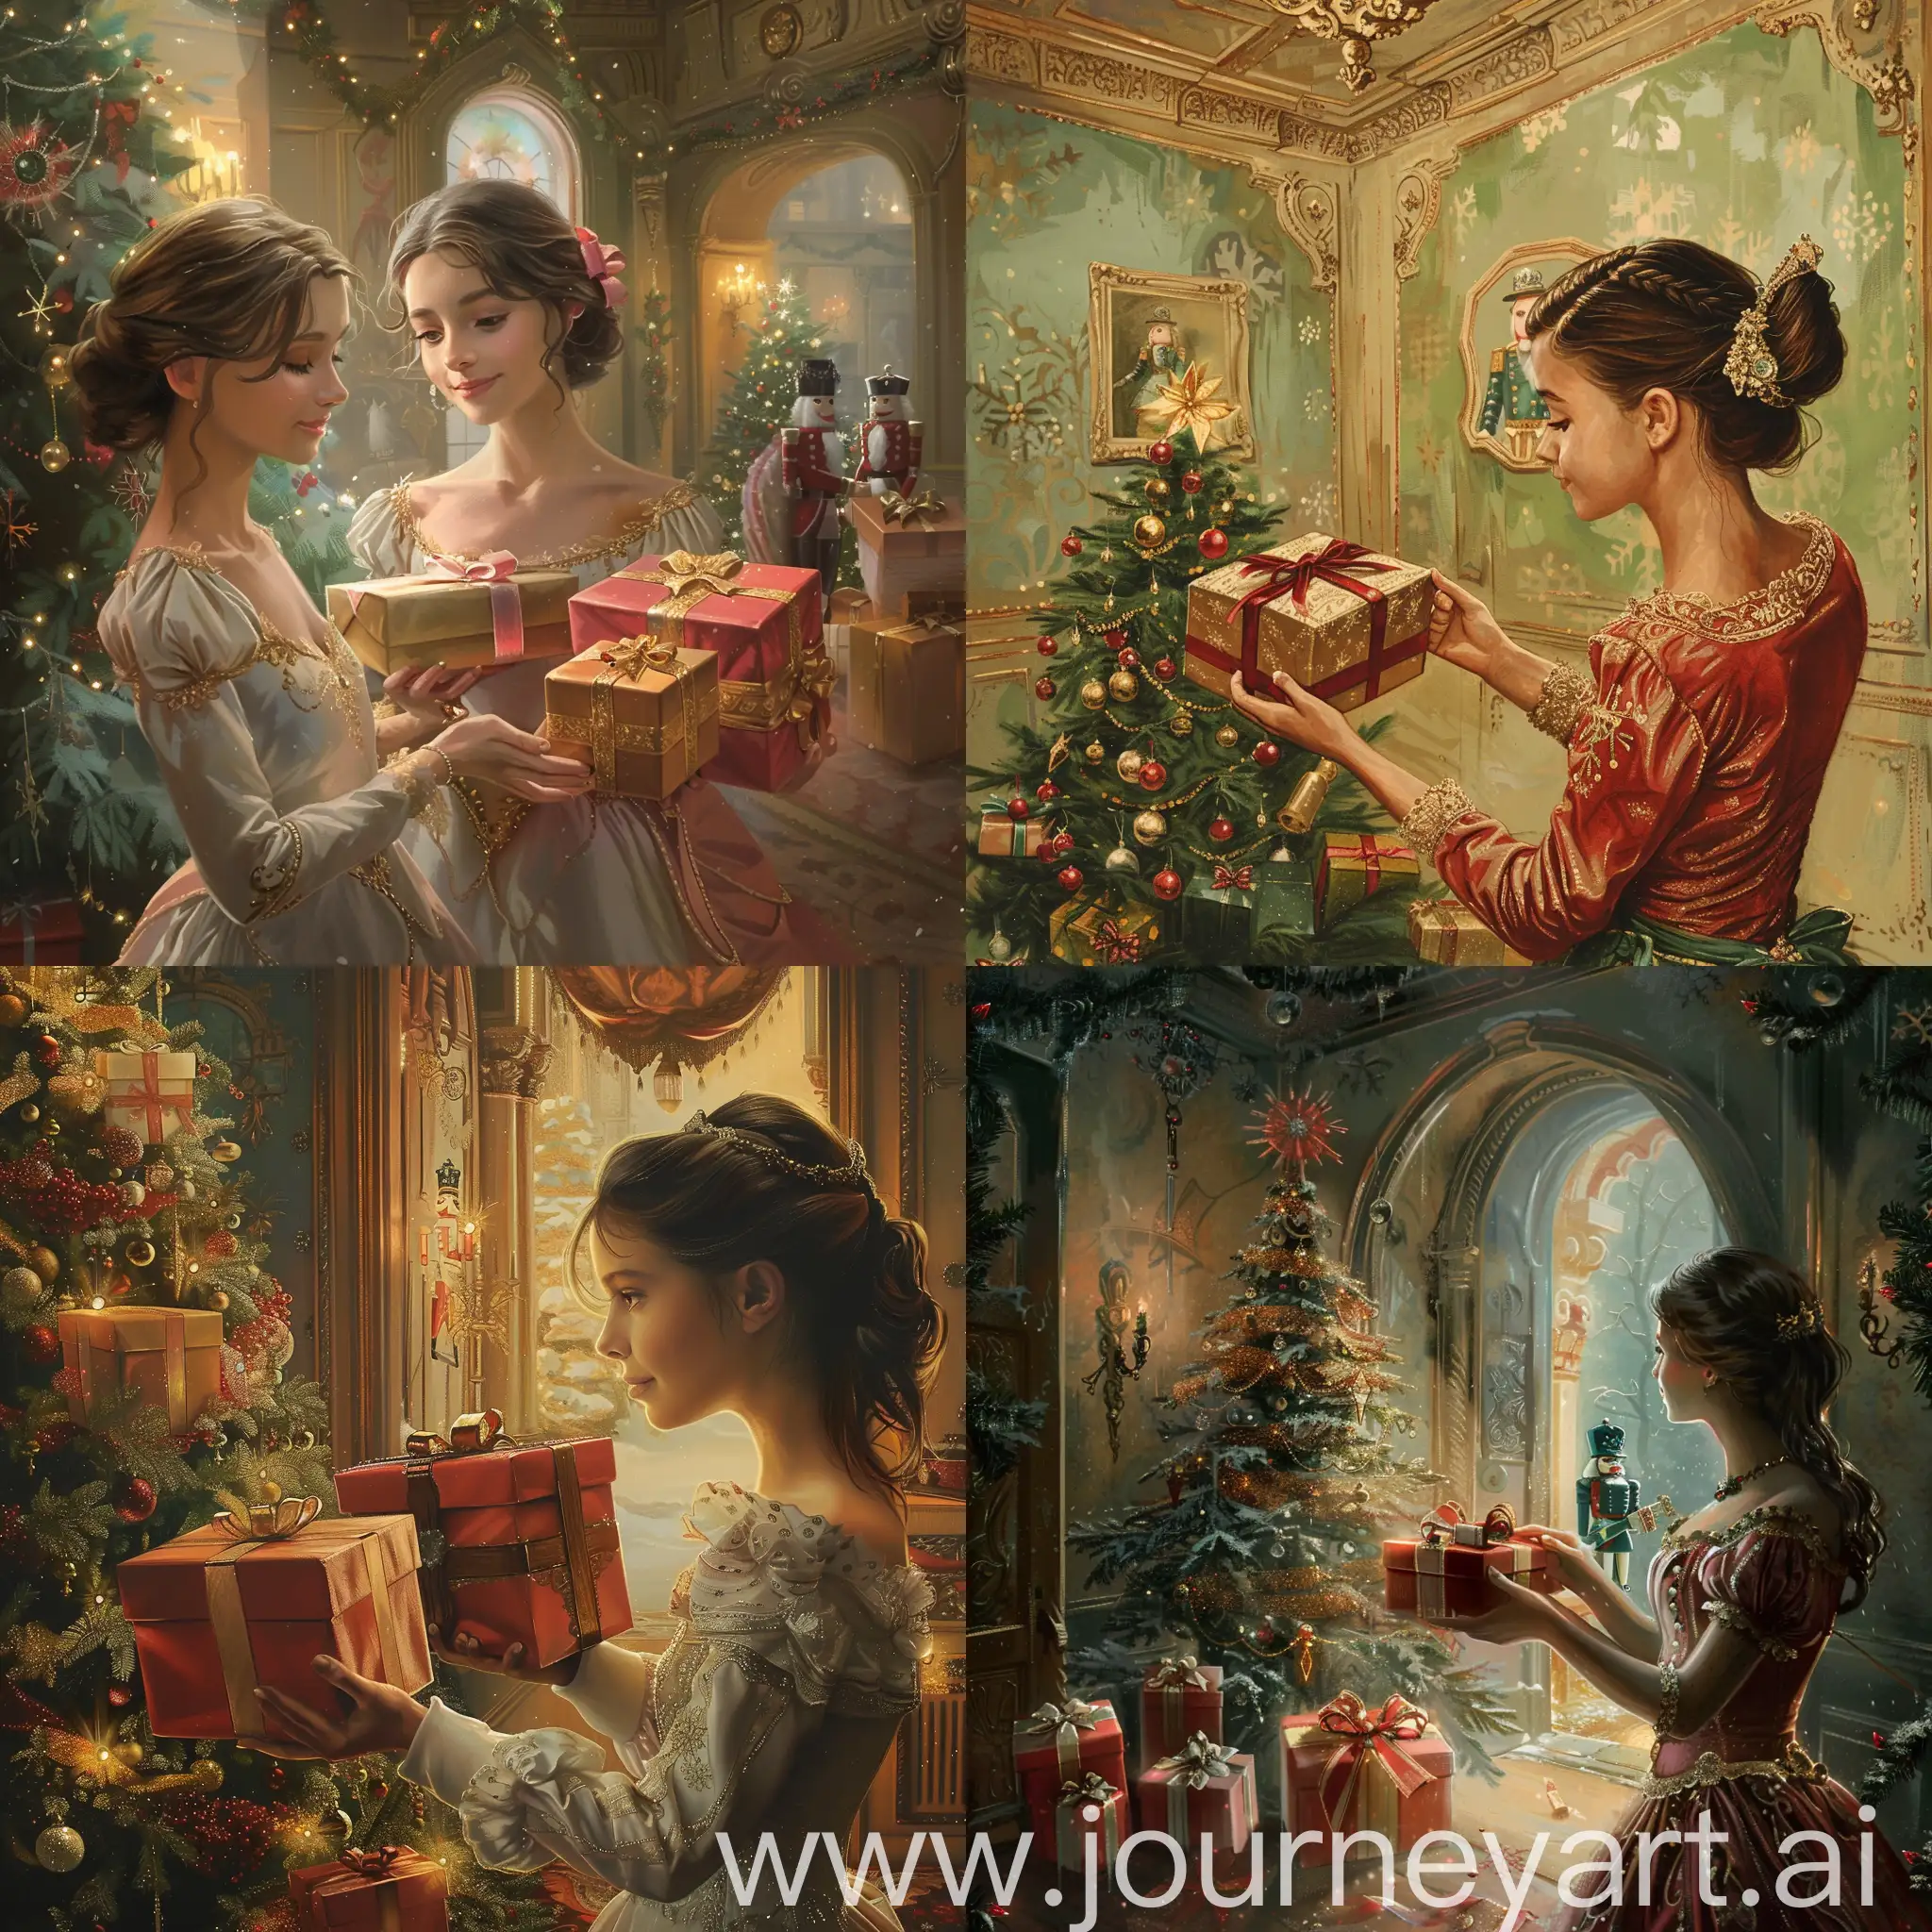 Marie from the Nutcracker fairy tale, who receive gifts in a room with a Christmas tree and in the setting of the Nutcracker fairy tale